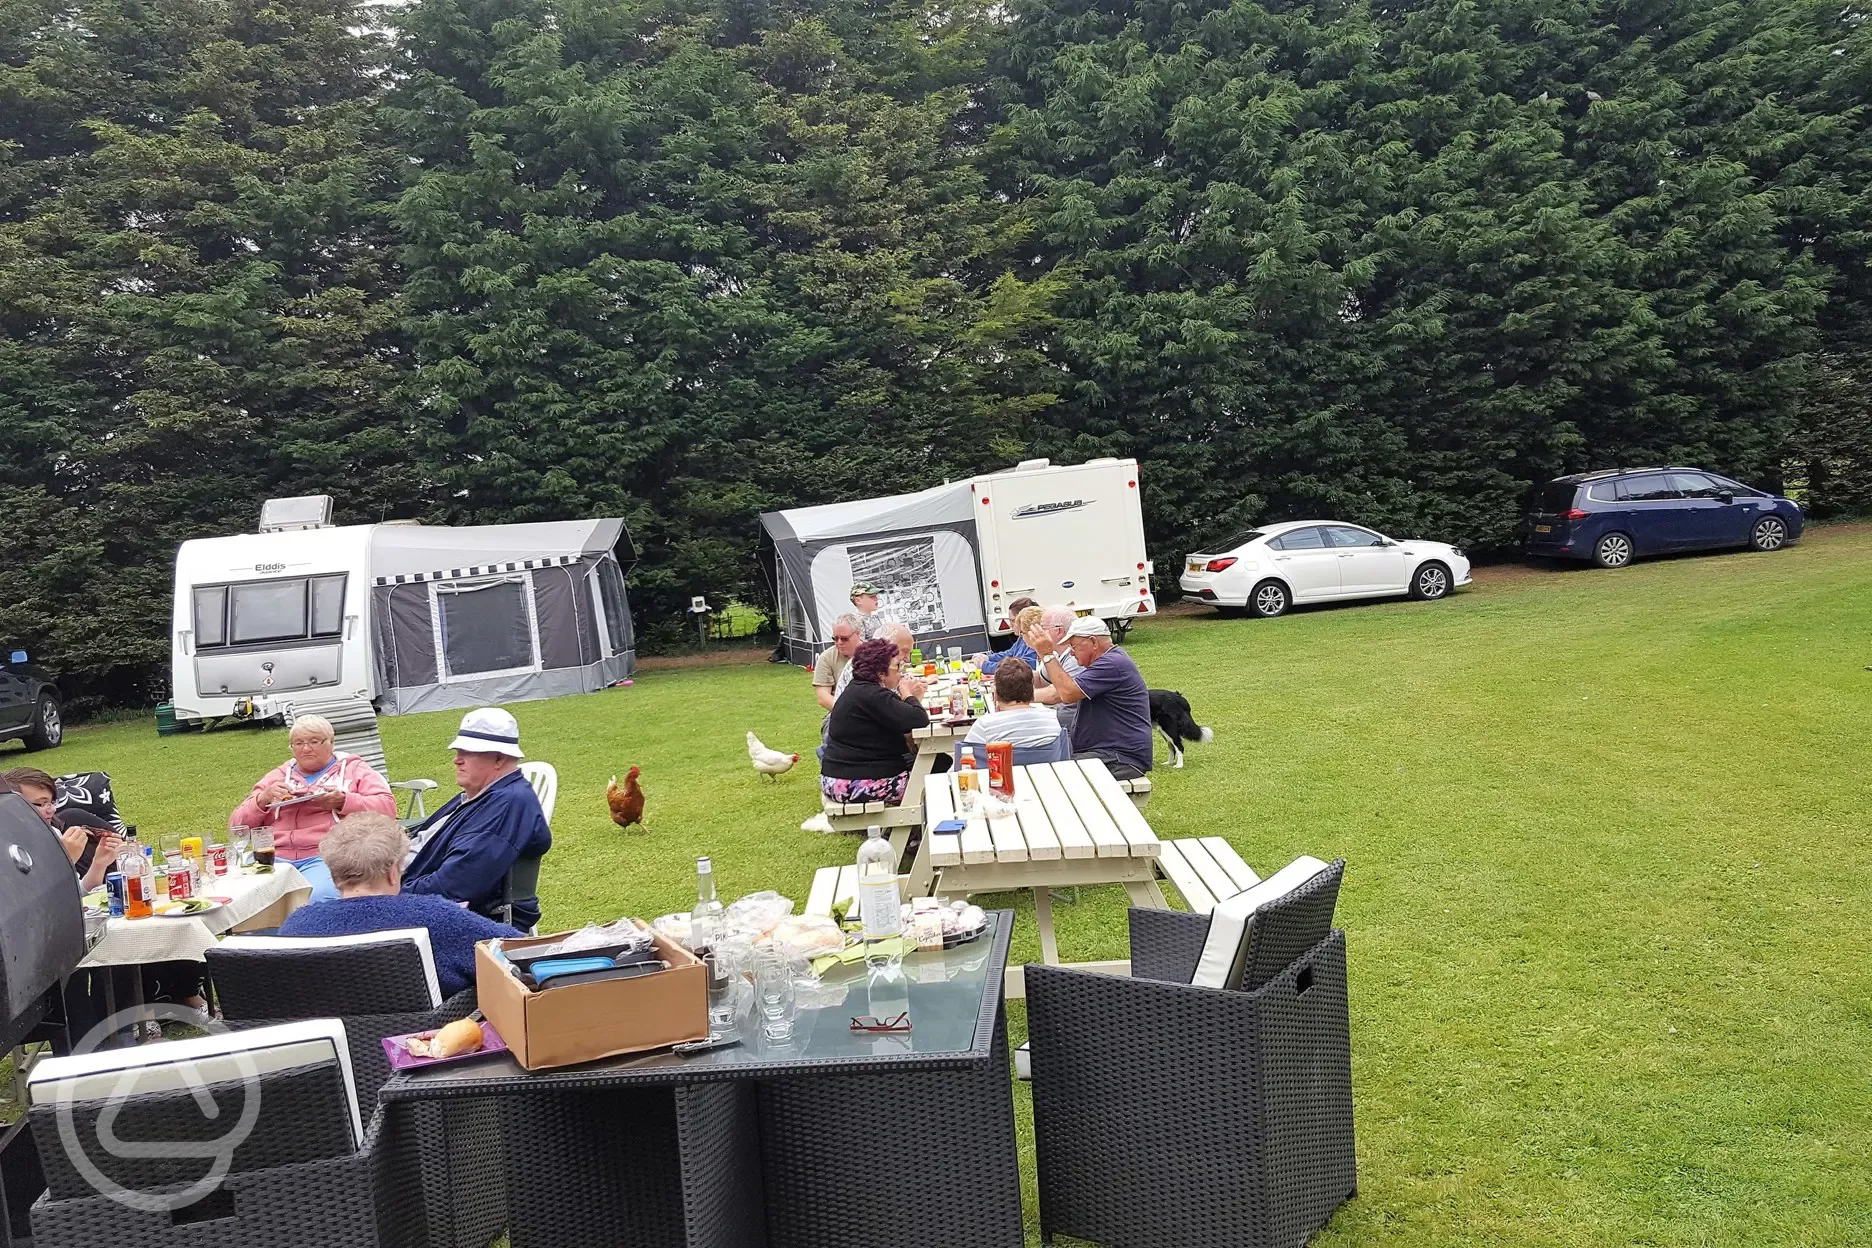 A group BBQ on site